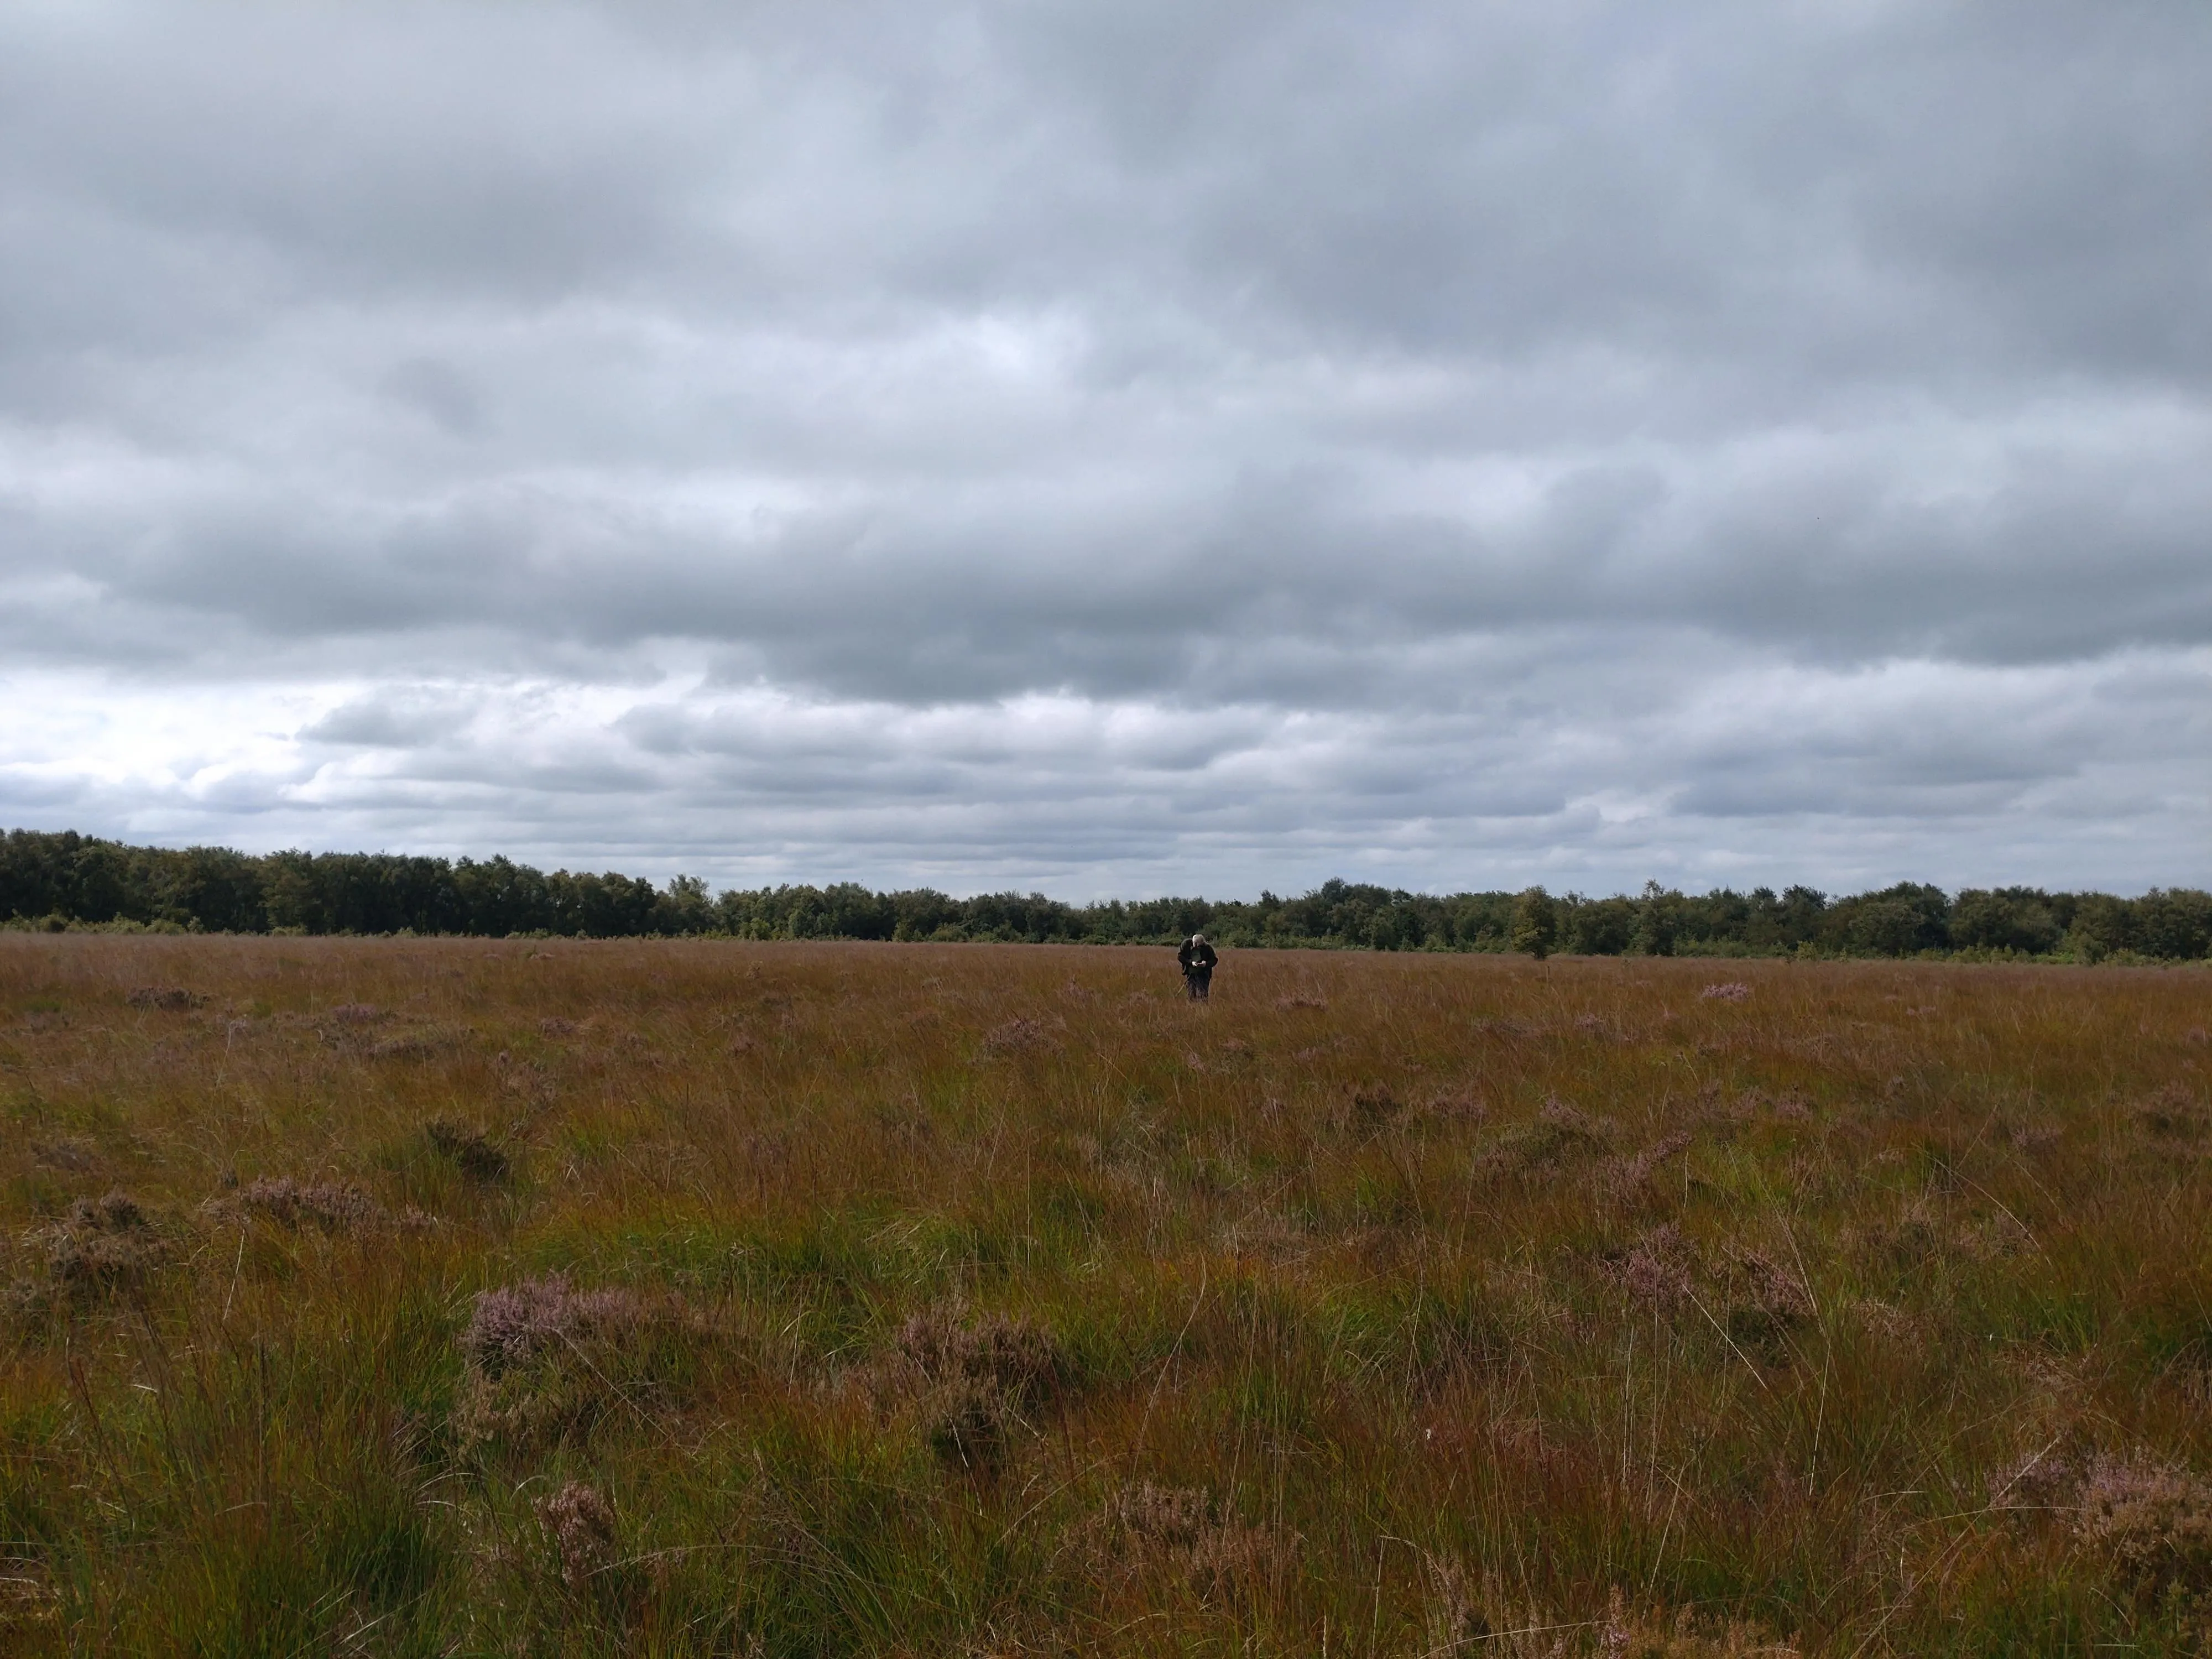 Testing the role of nutrient input thresholds in governing microbial-mediated carbon sequestration for temperate peatlands